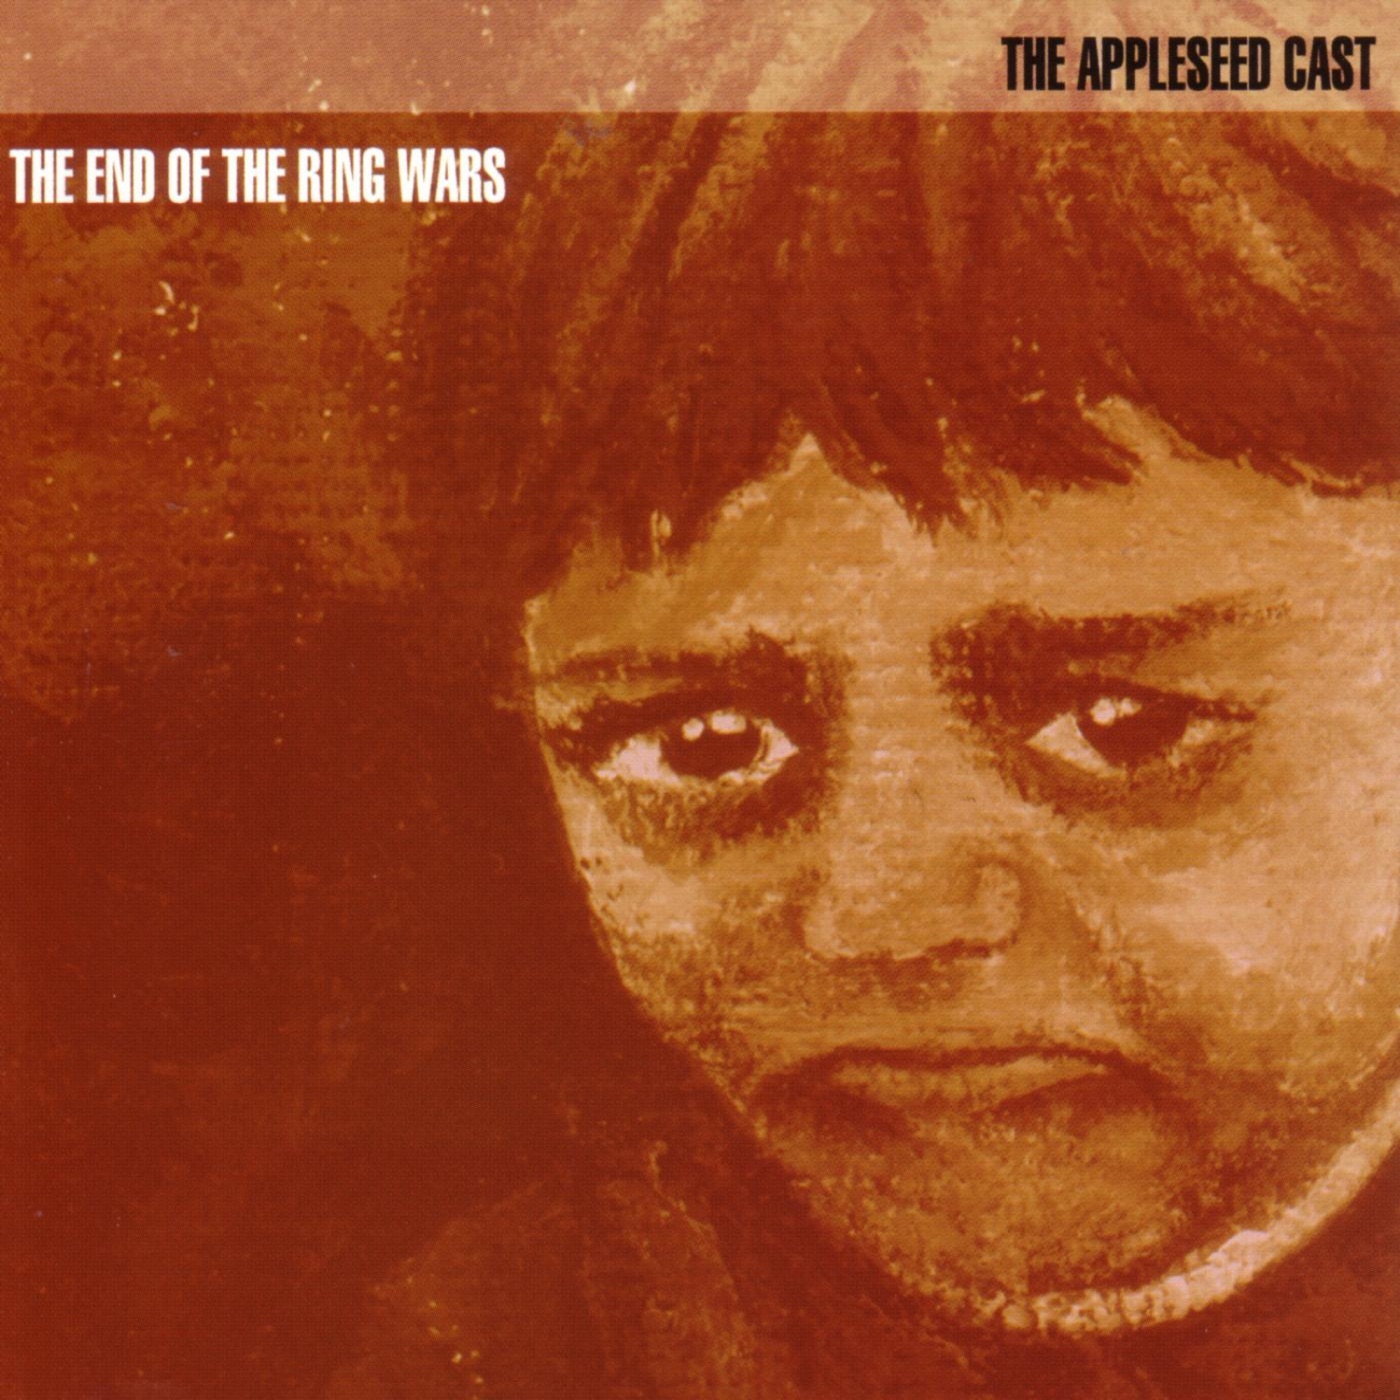 The End of the Ring Wars by The Appleseed Cast